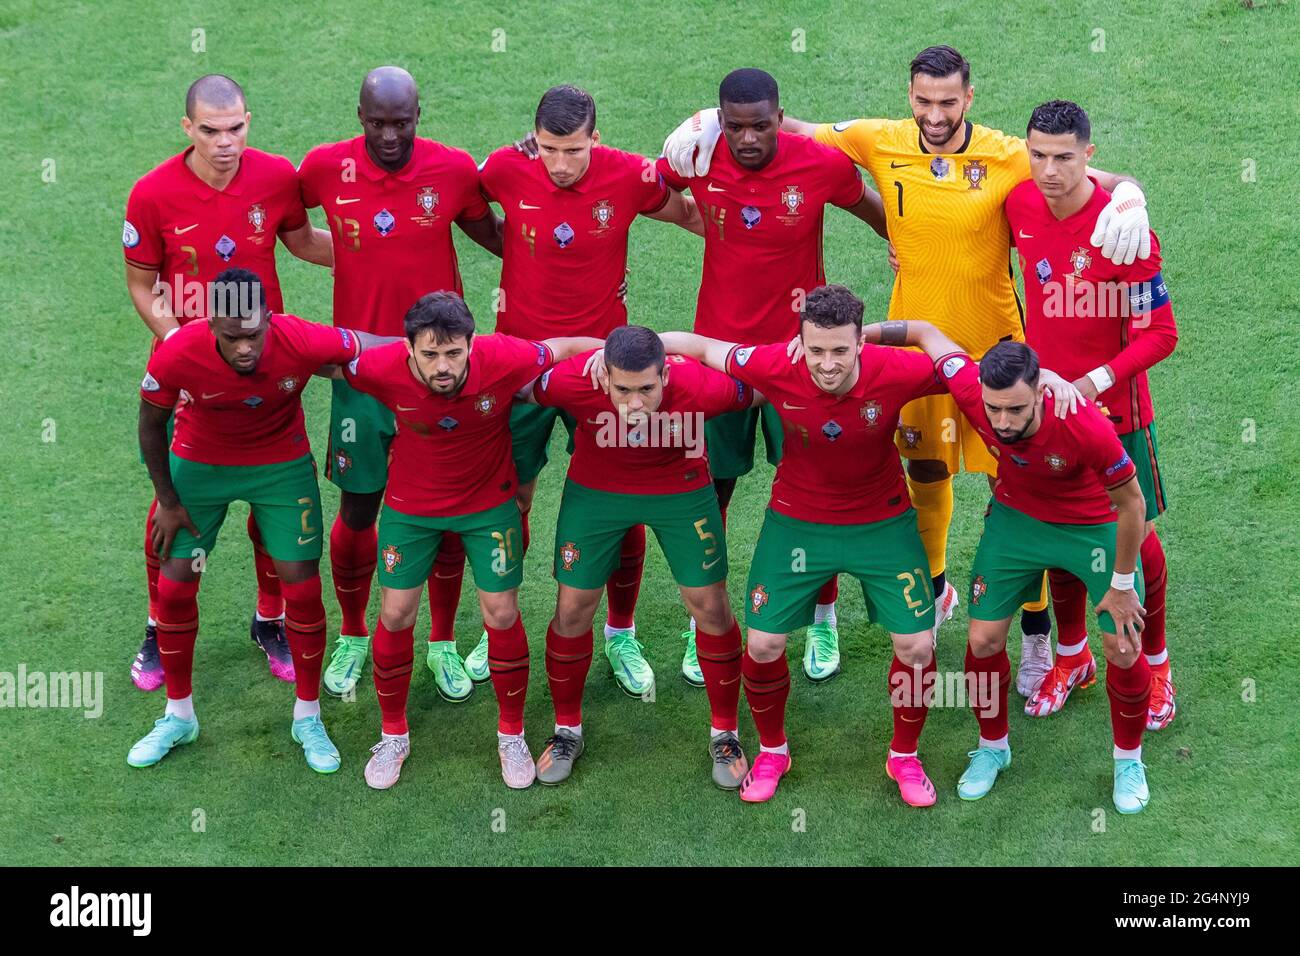 Munich, Germany. 19th June, 2021. Portugal national football team pose for  a group photo during the UEFA EURO 2020 Championship Group F match between  Portugal and Germany at Football Arena Munich. (Final